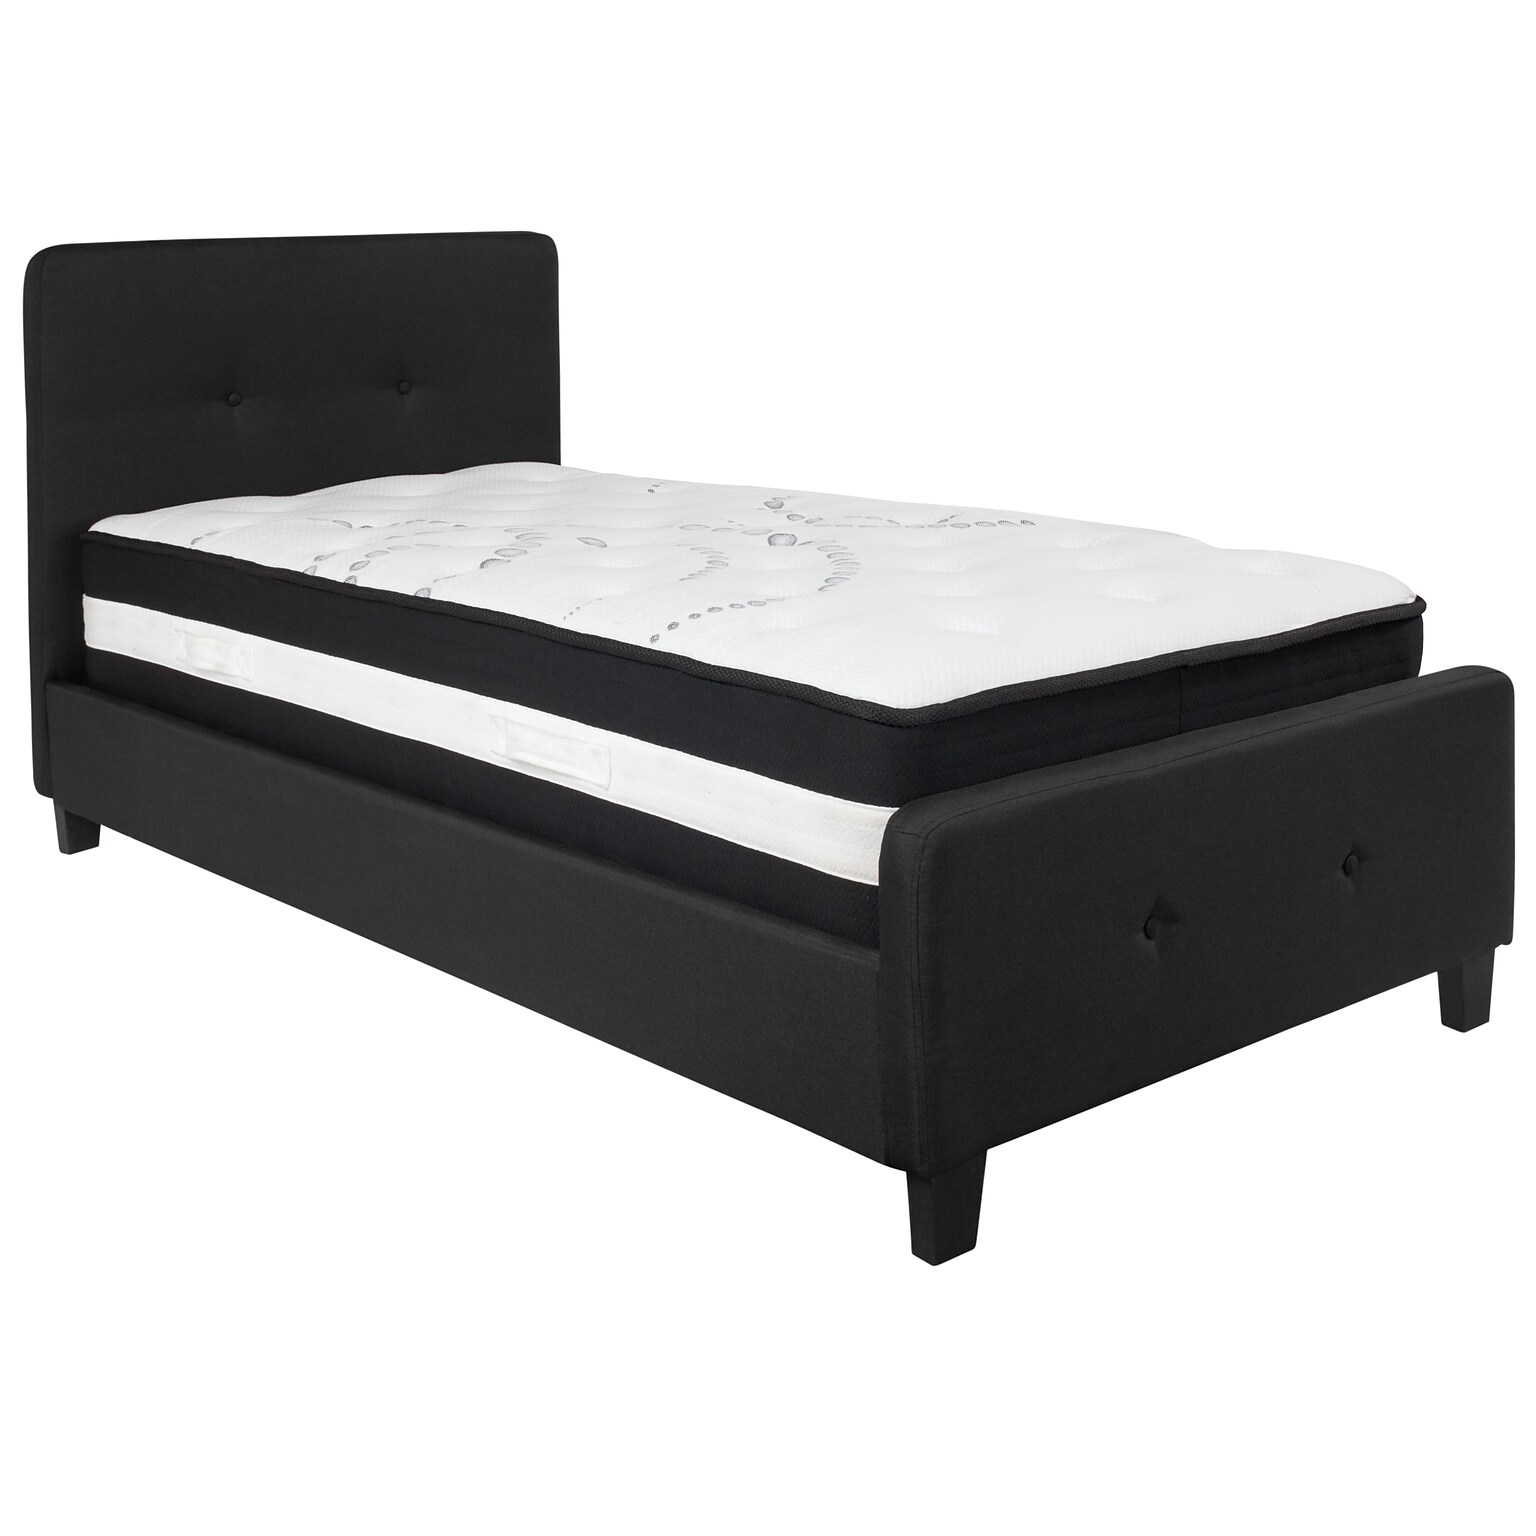 Flash Furniture Tribeca Tufted Upholstered Platform Bed in Black Fabric with Pocket Spring Mattress, Twin (HGBM21)